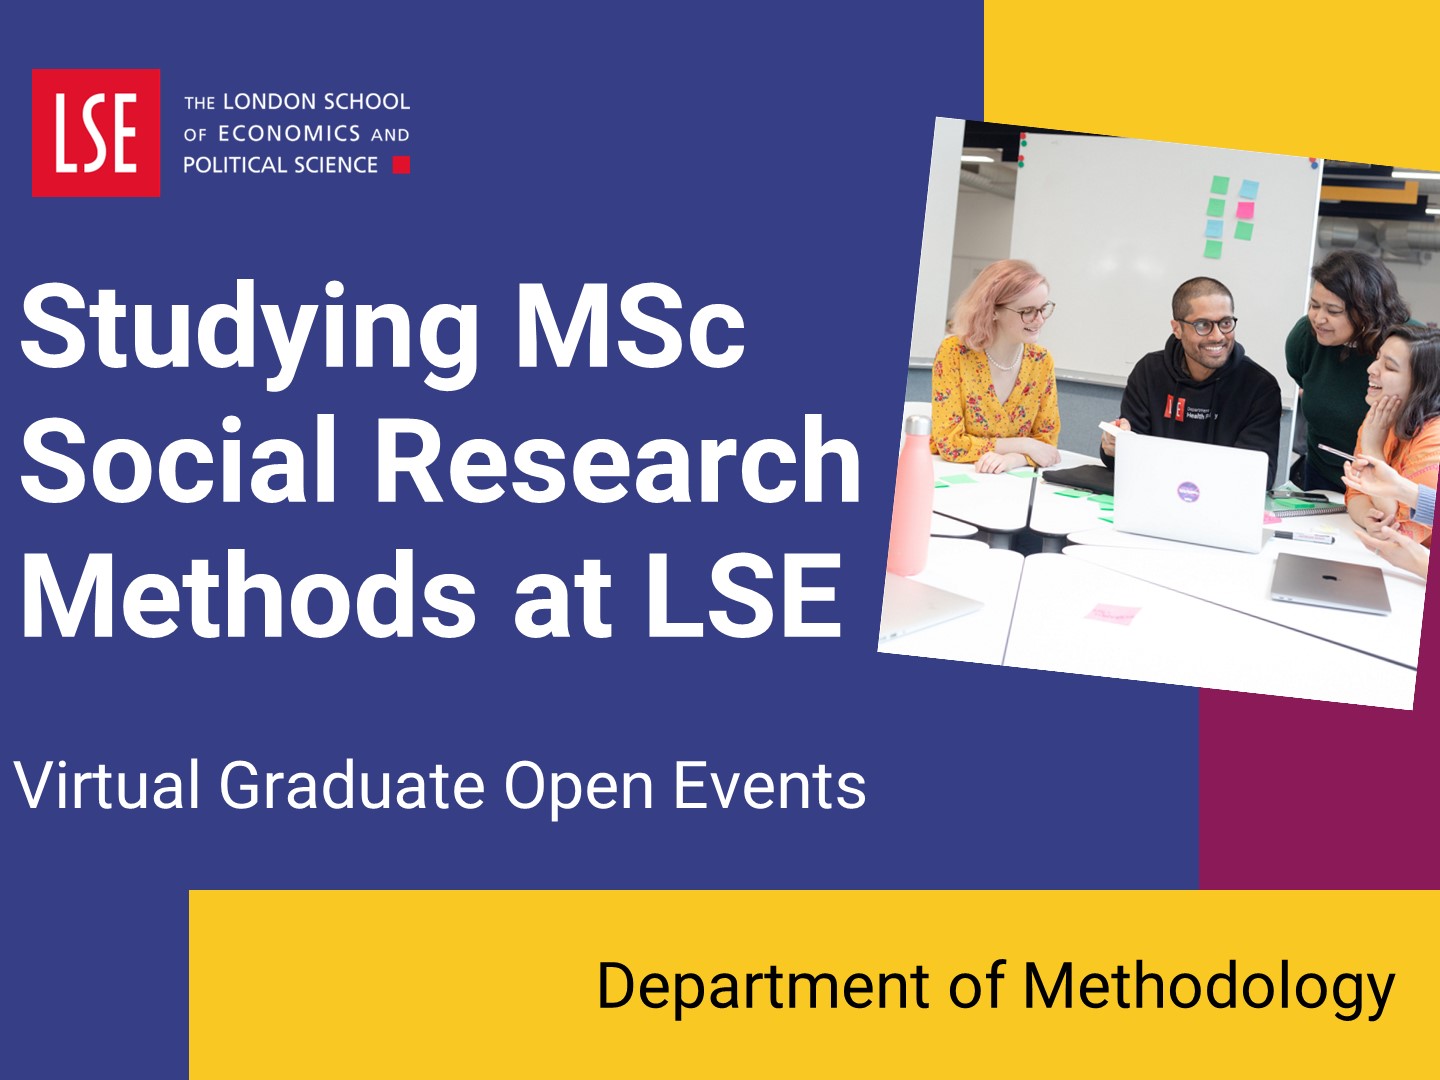 An introduction to studying MSc Social Research Methods at LSE